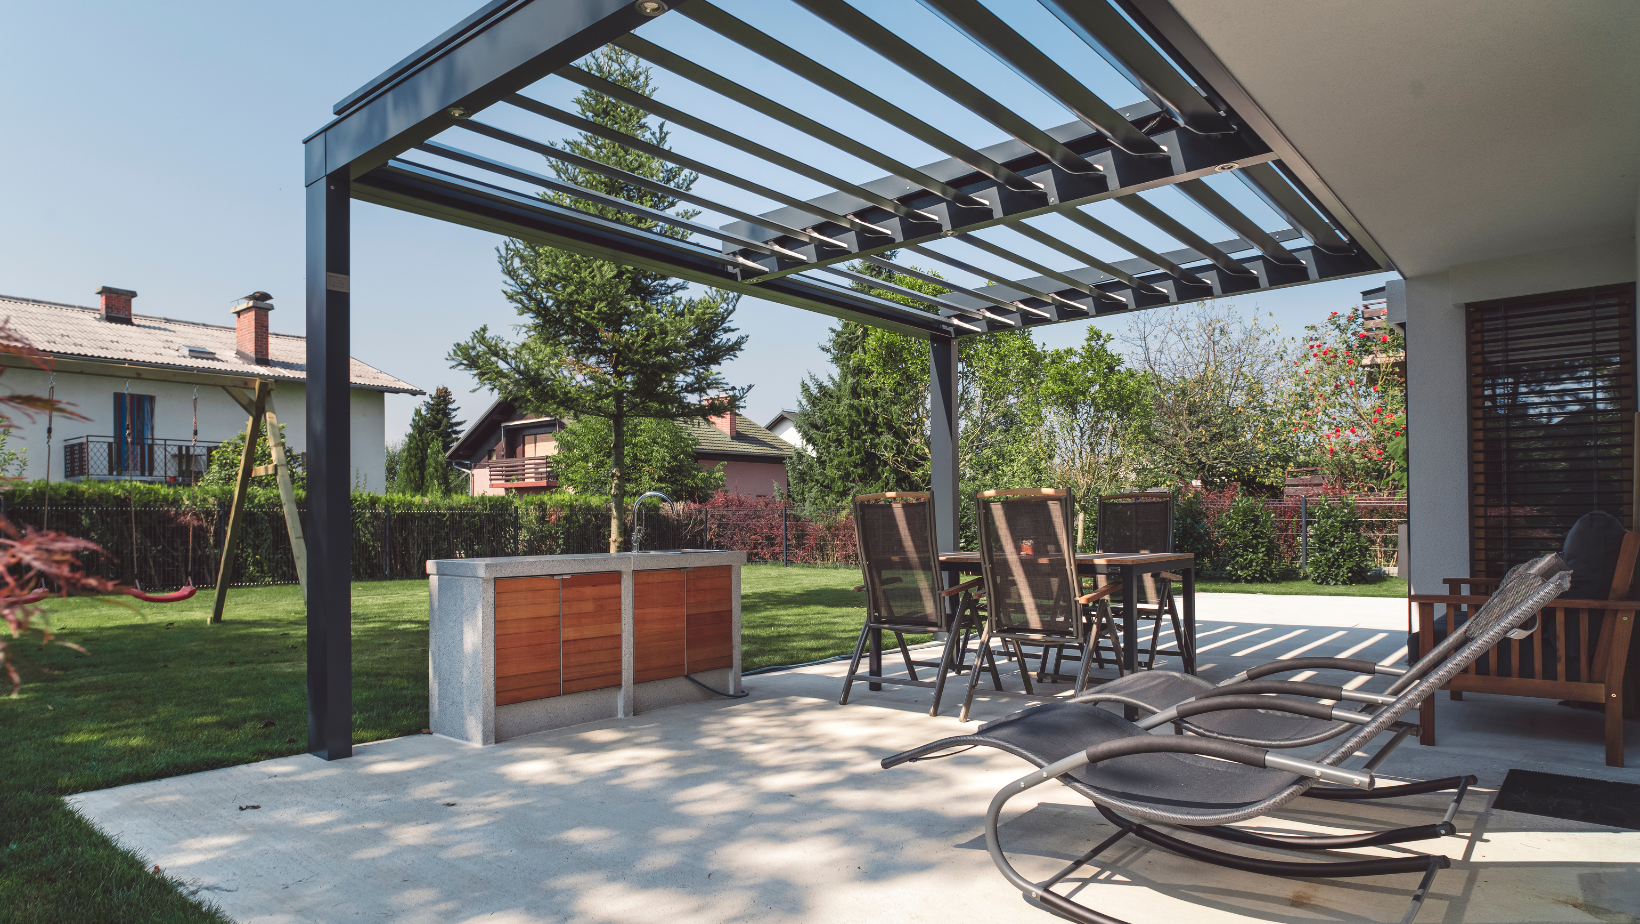 Vergola system: The ultimate outdoor living solution for architects and designers